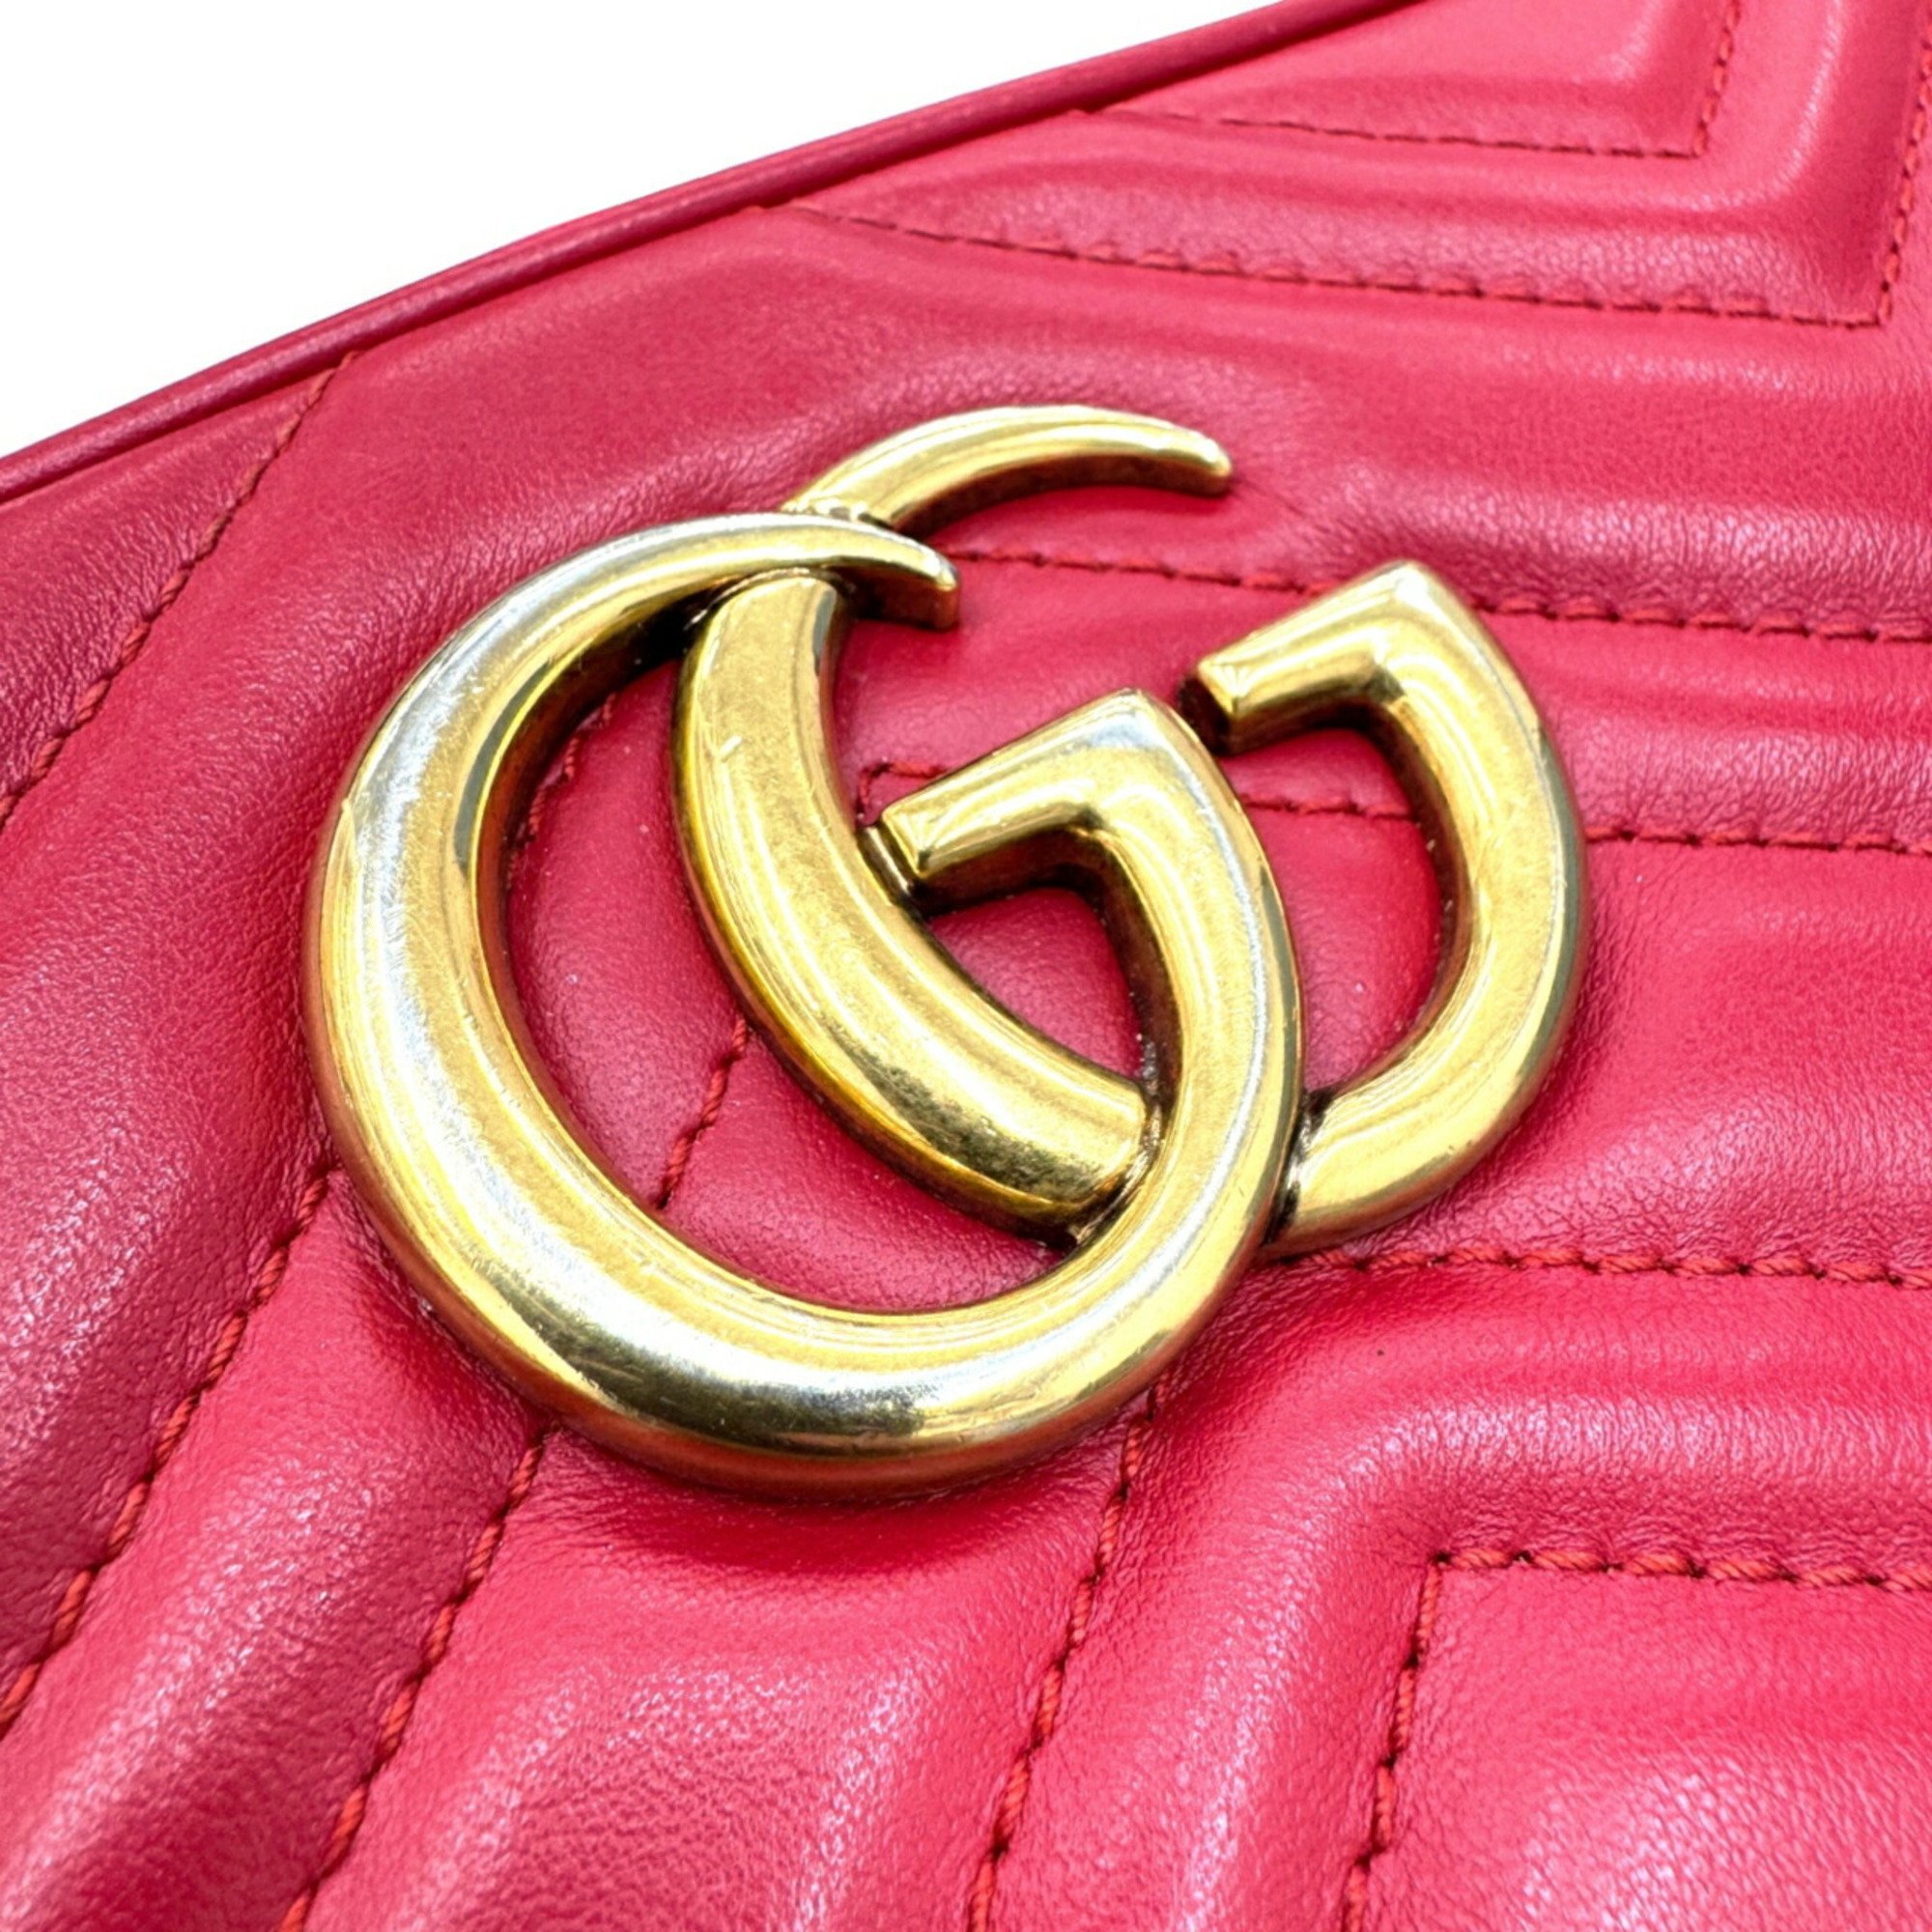 GUCCI GG Marmont Quilted Small Shoulder Bag 447632 Leather Red Women's